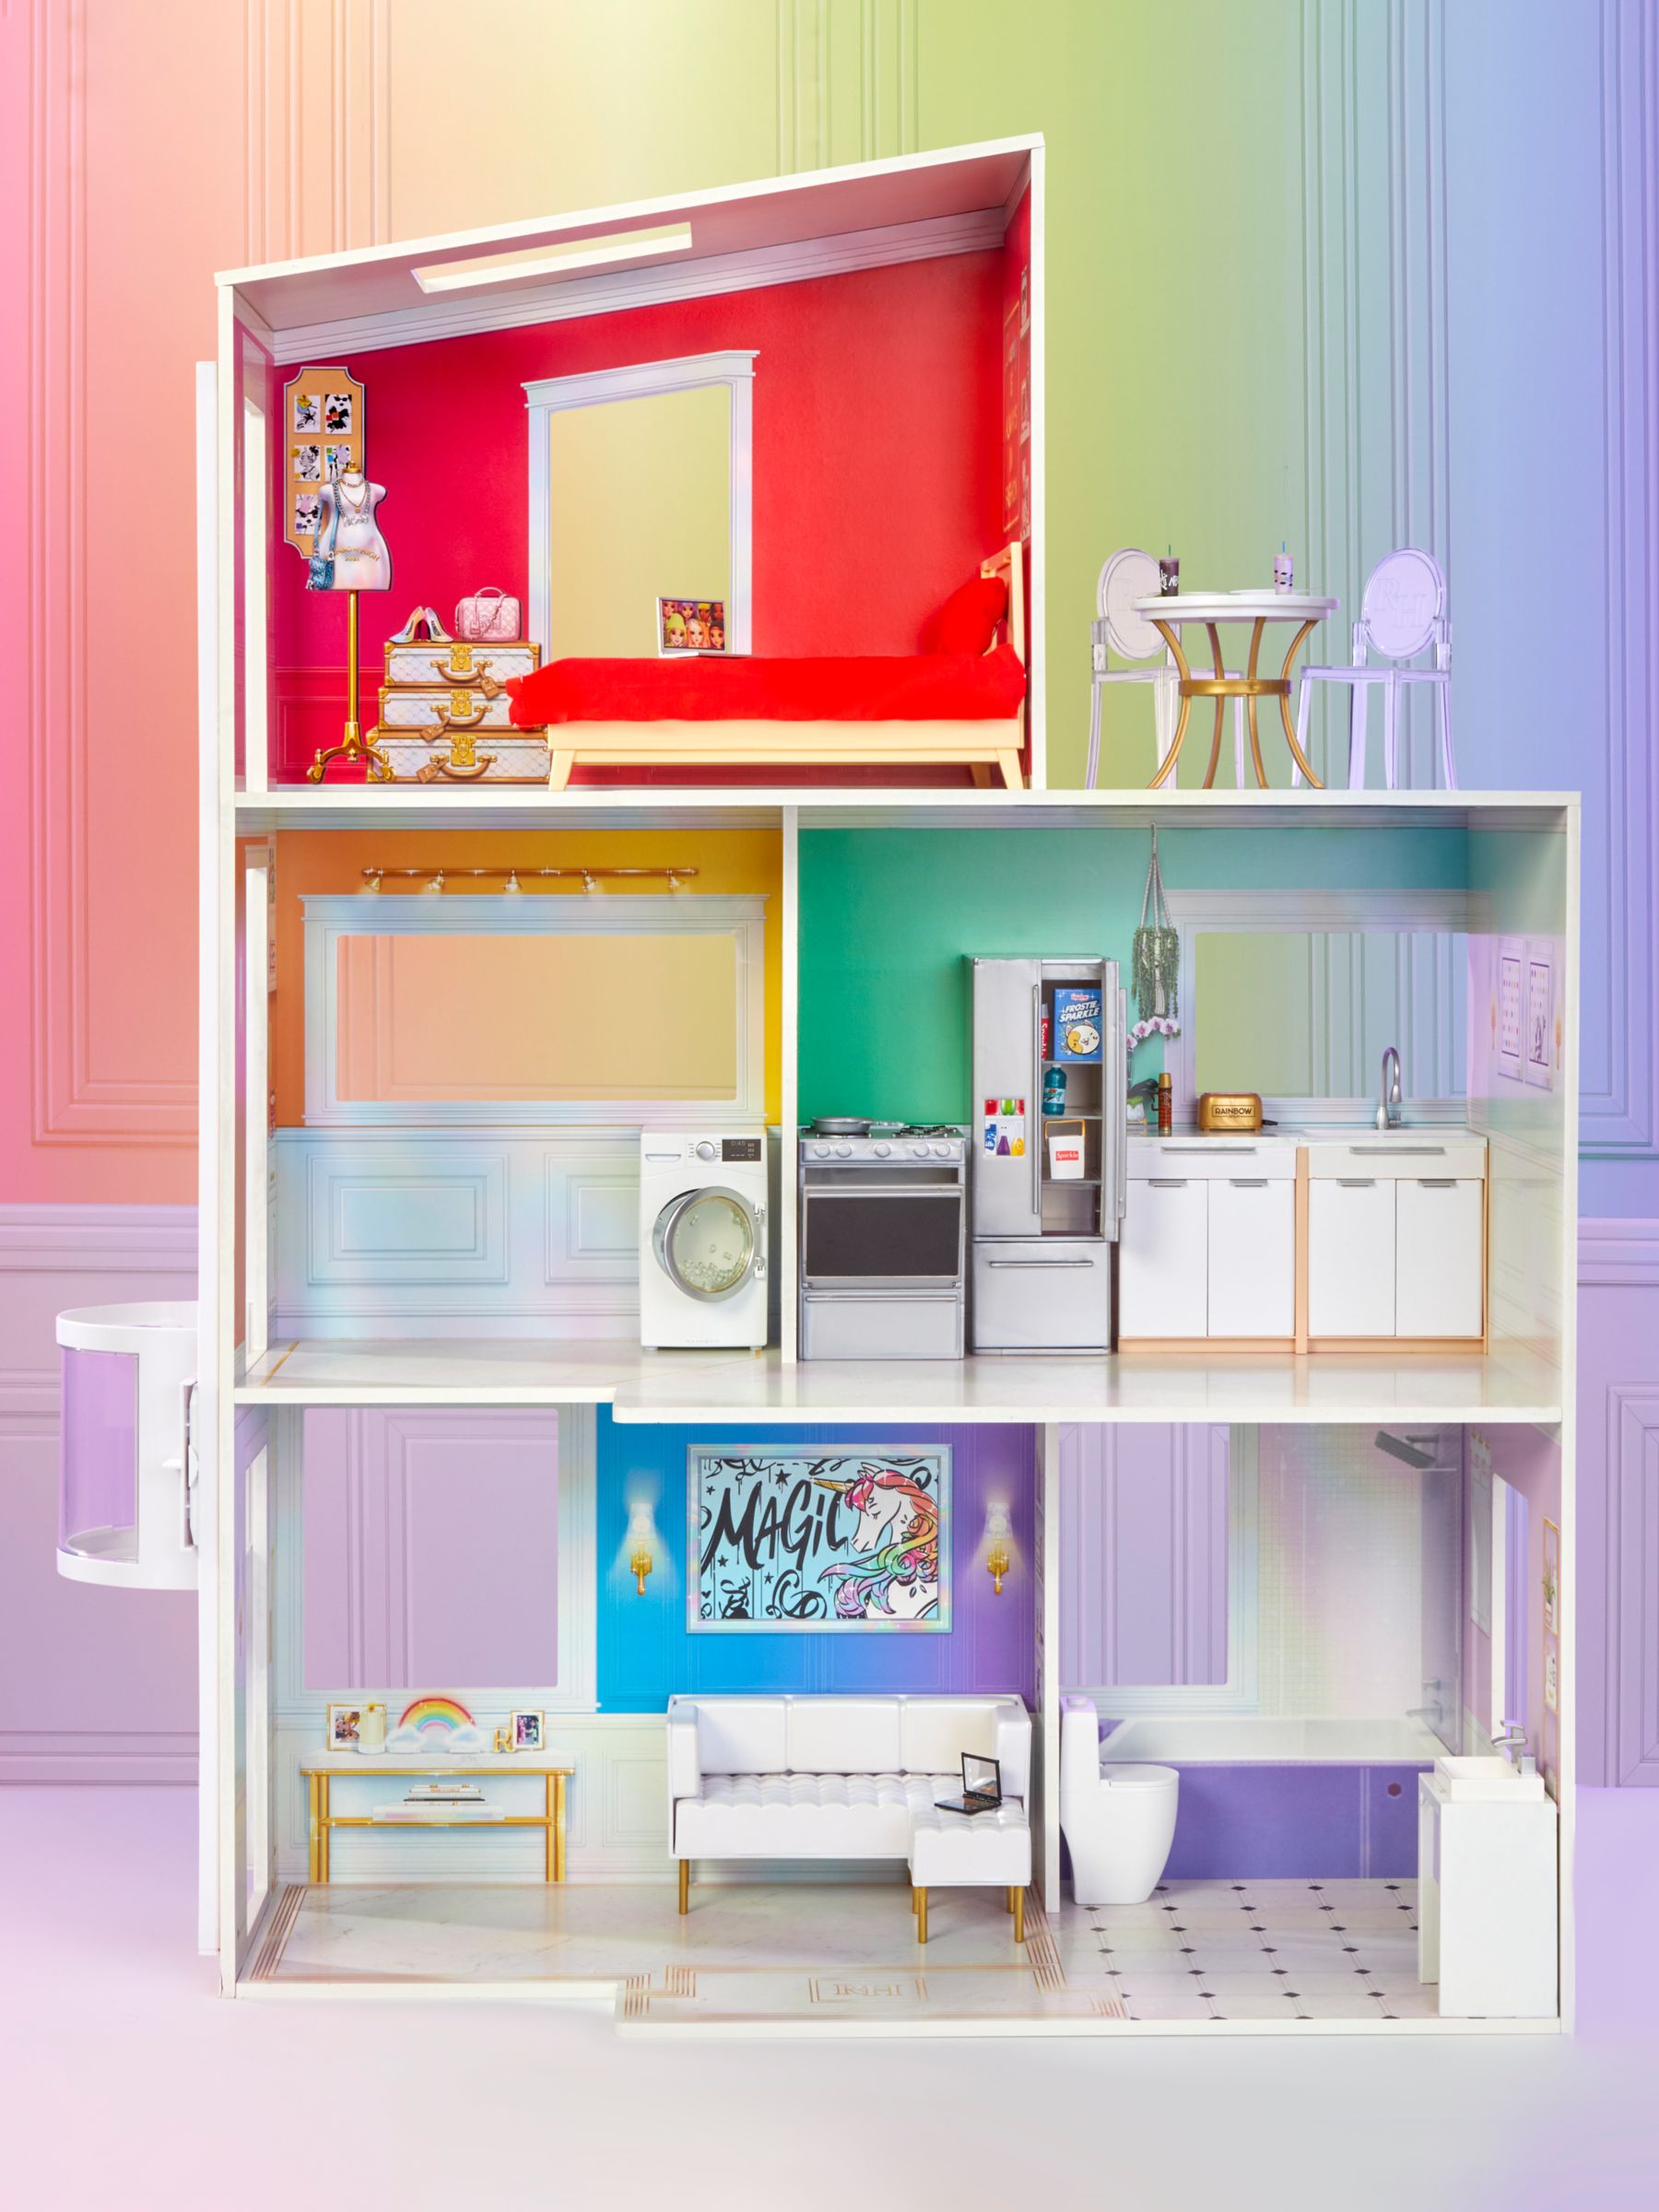 Rainbow High Townhouse 3-Story Wooden Doll House